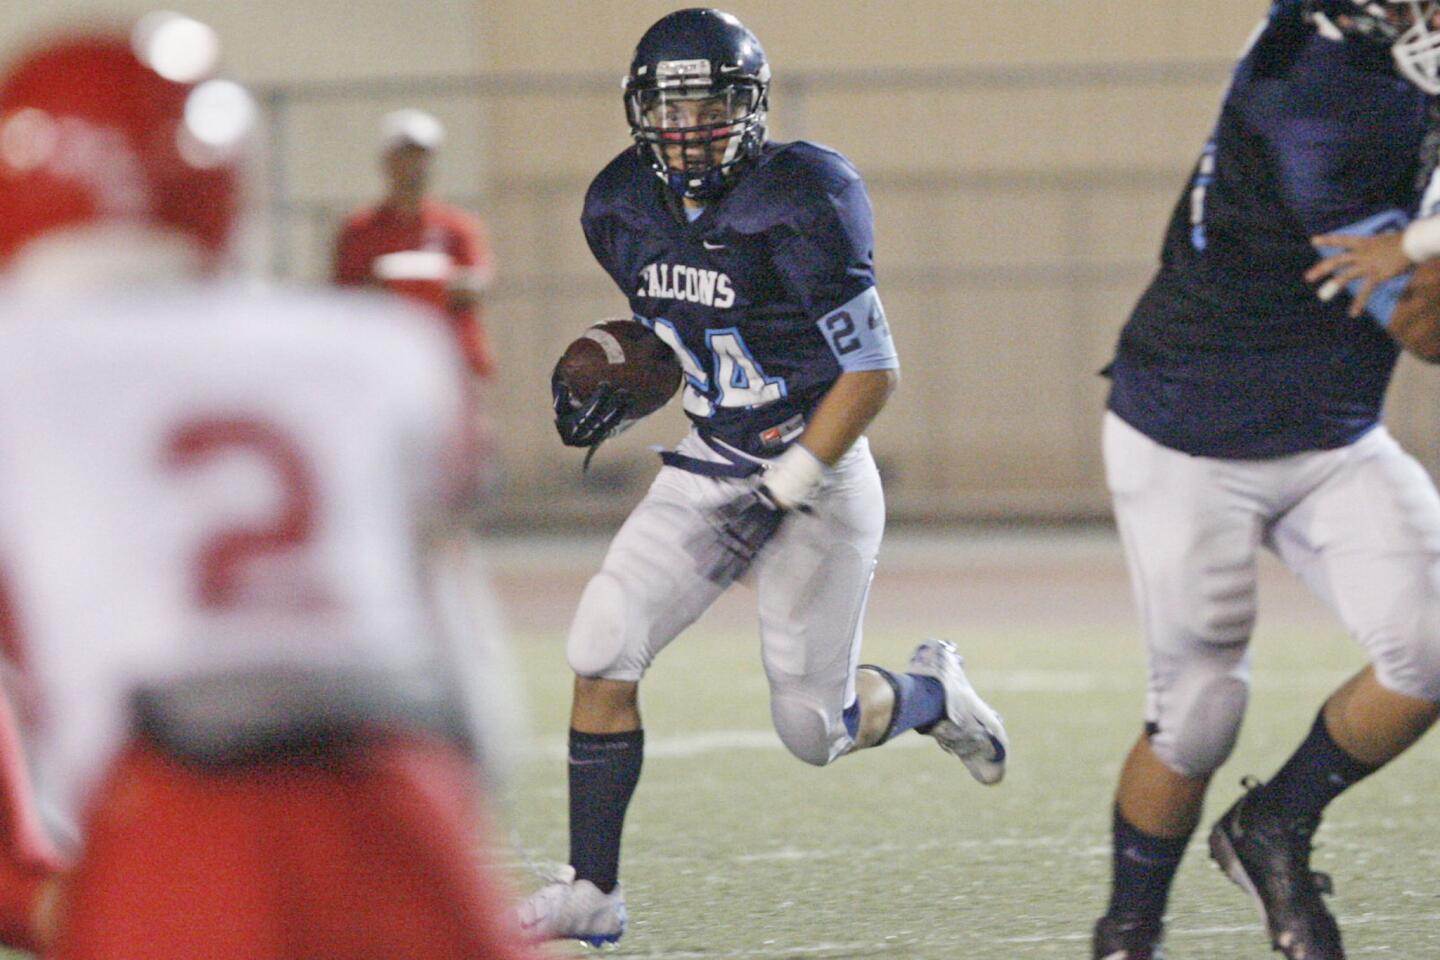 CV's Kyle Tavizon runs with the ball during a game against Burroughs at Glendale High School on Thursday, October 4, 2012.